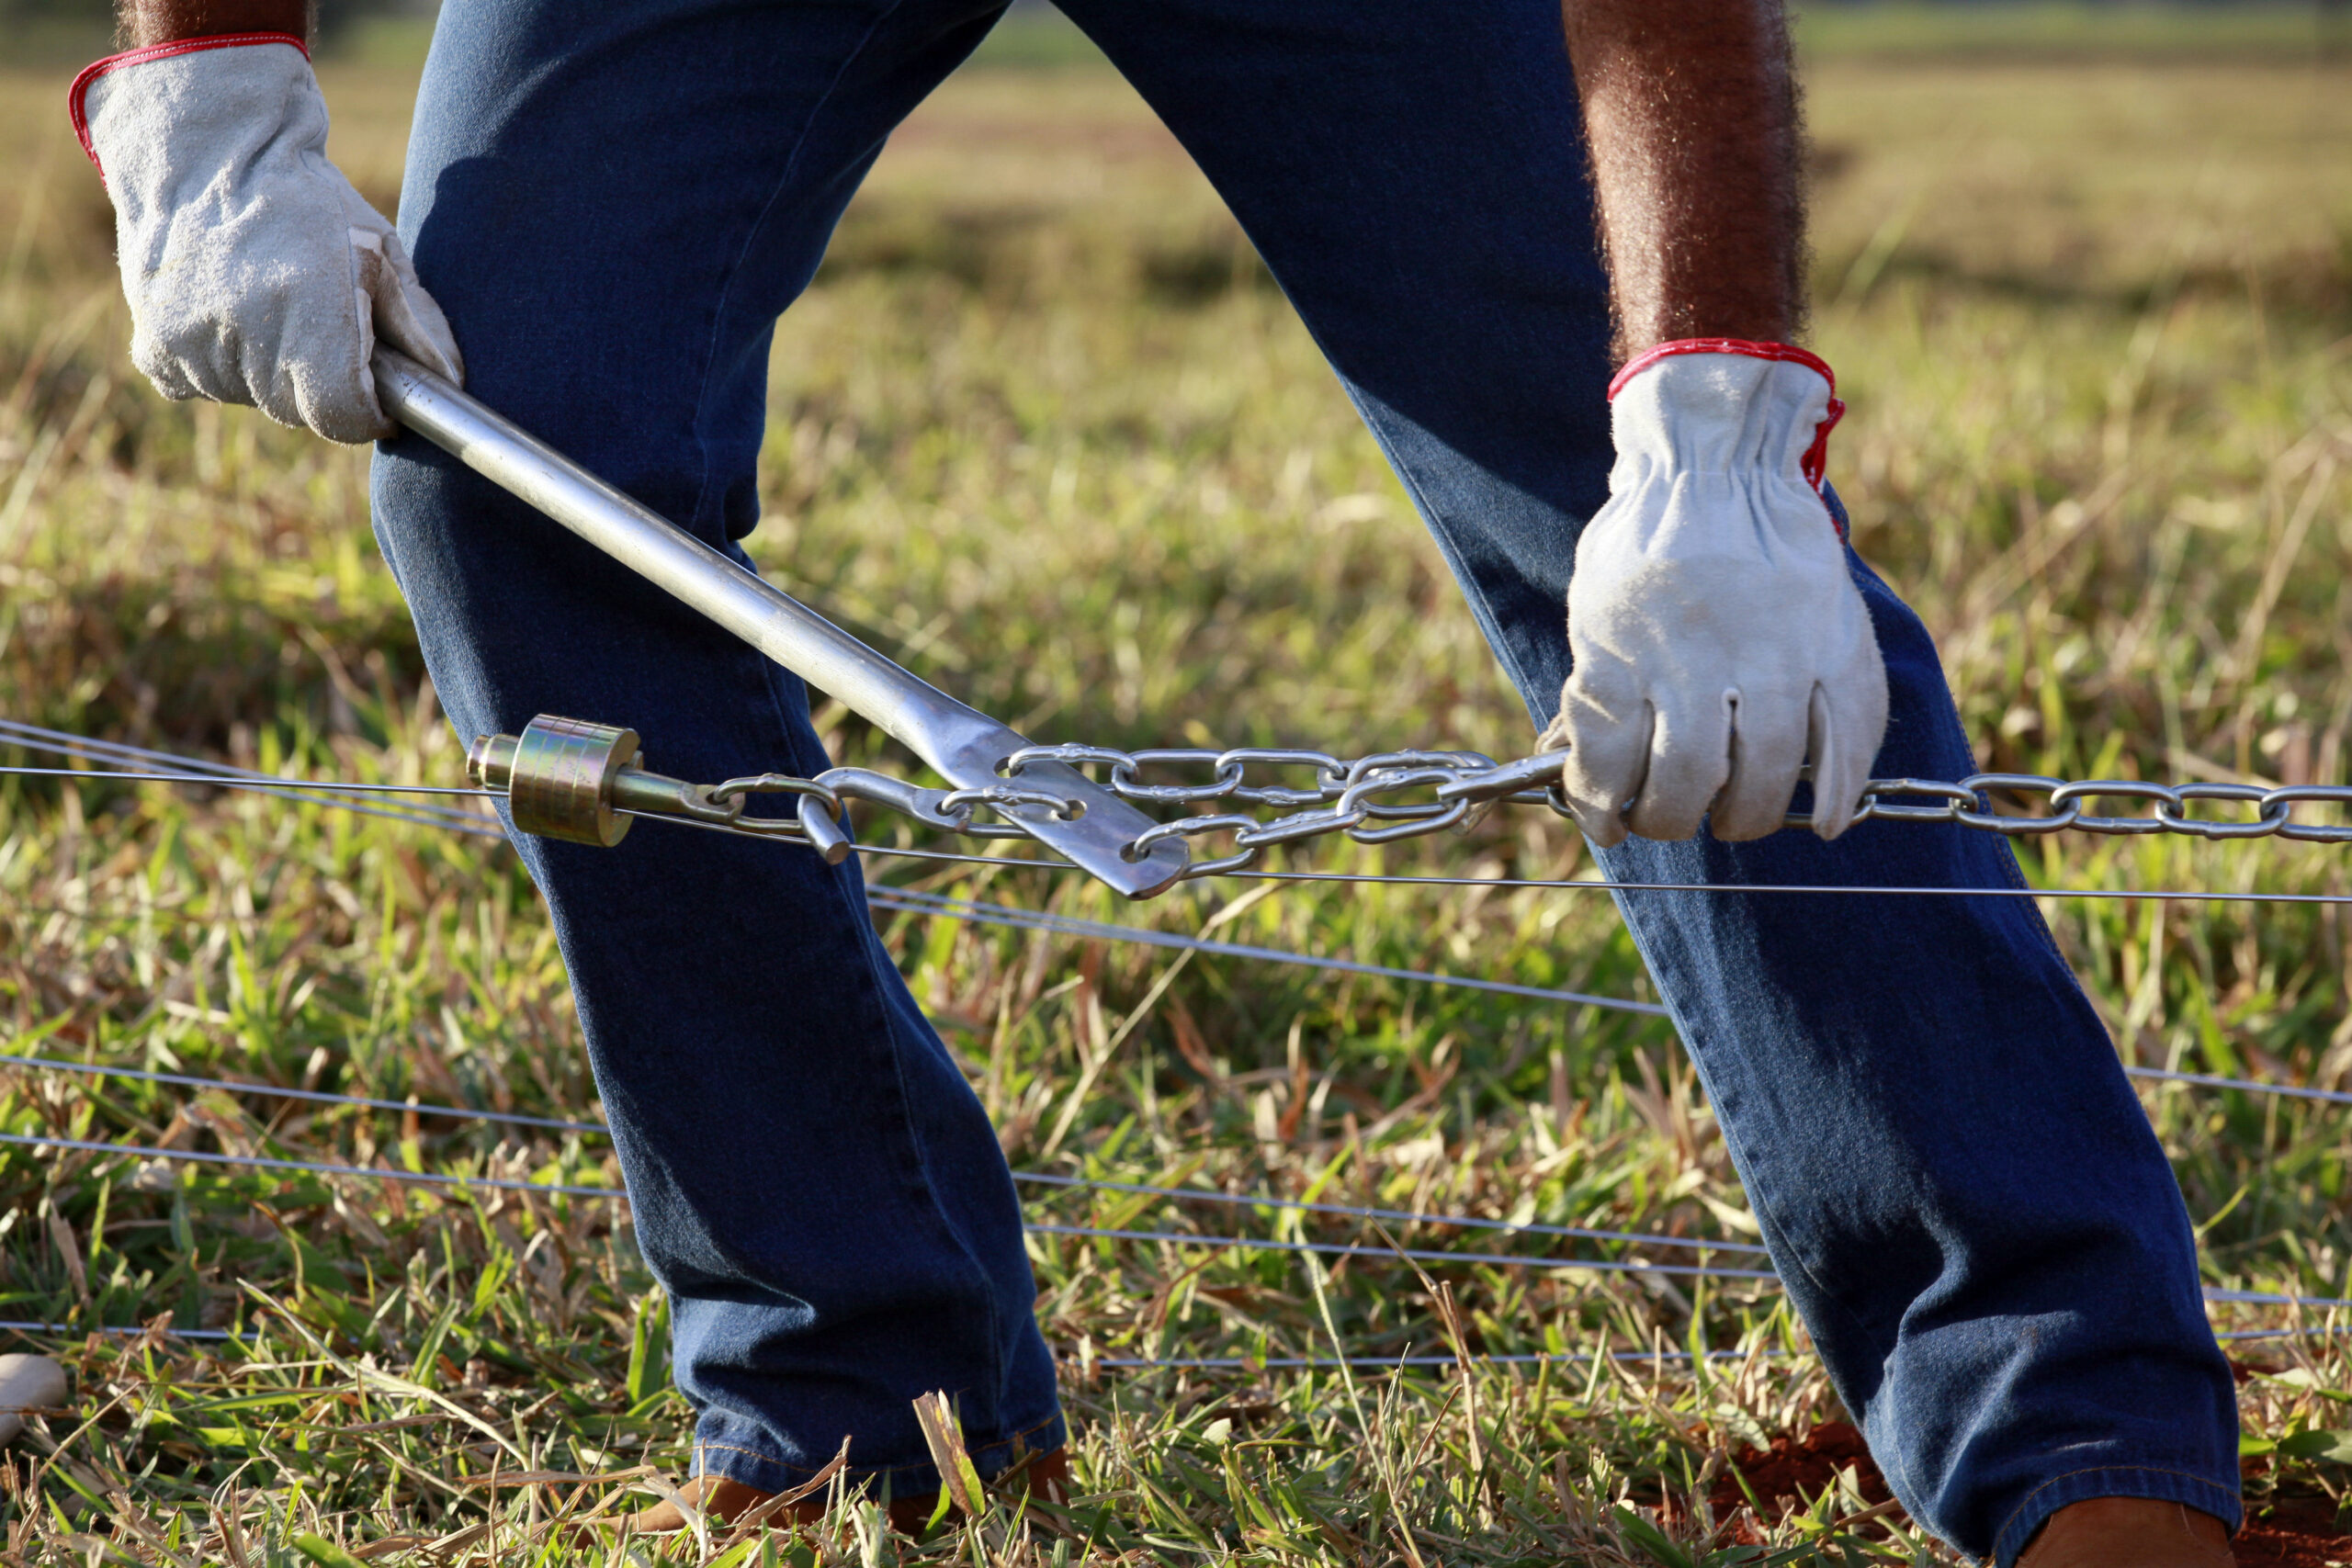 Wearing Personal Protective Equipment is crucial for ensuring the safety of fencing workers.